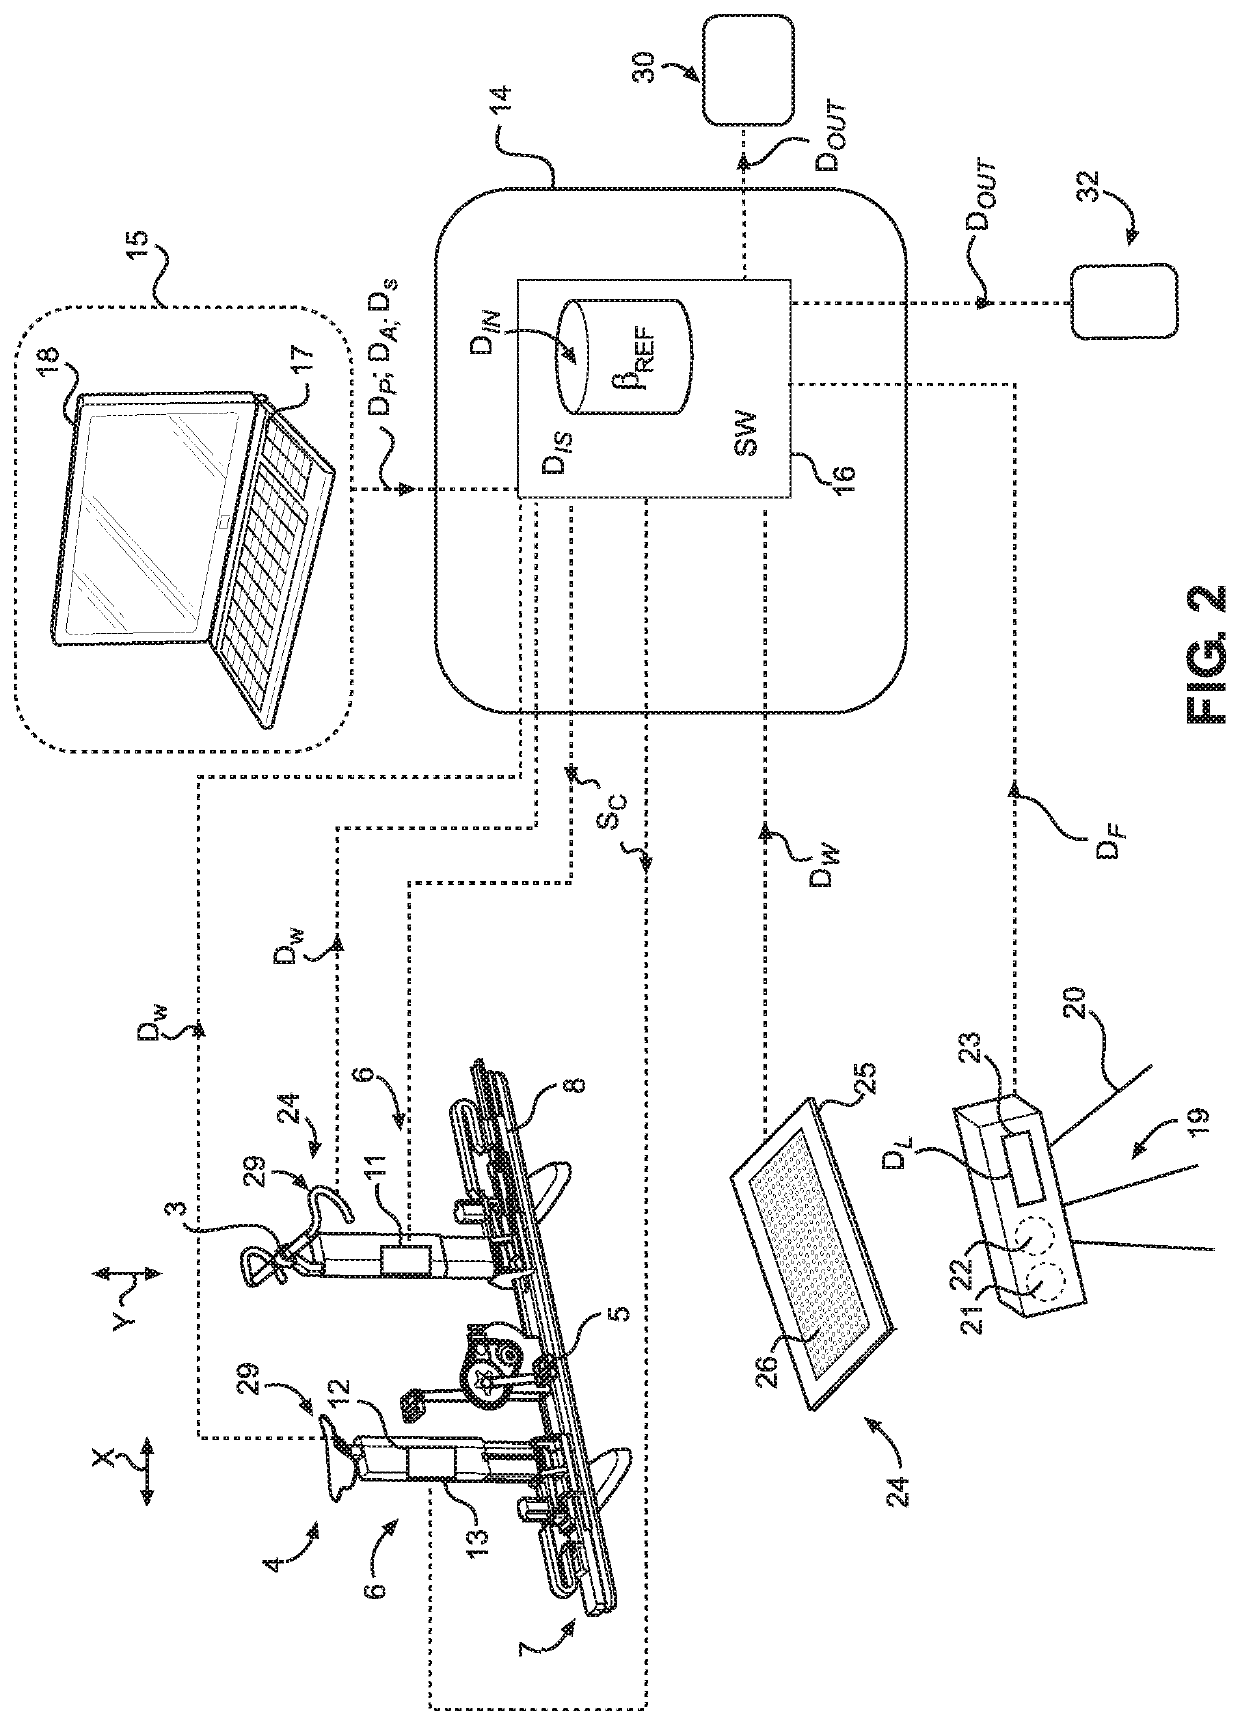 Method and system for biomechanical analysis of the posture of a cyclist and automatic customized manufacture of bicycle parts